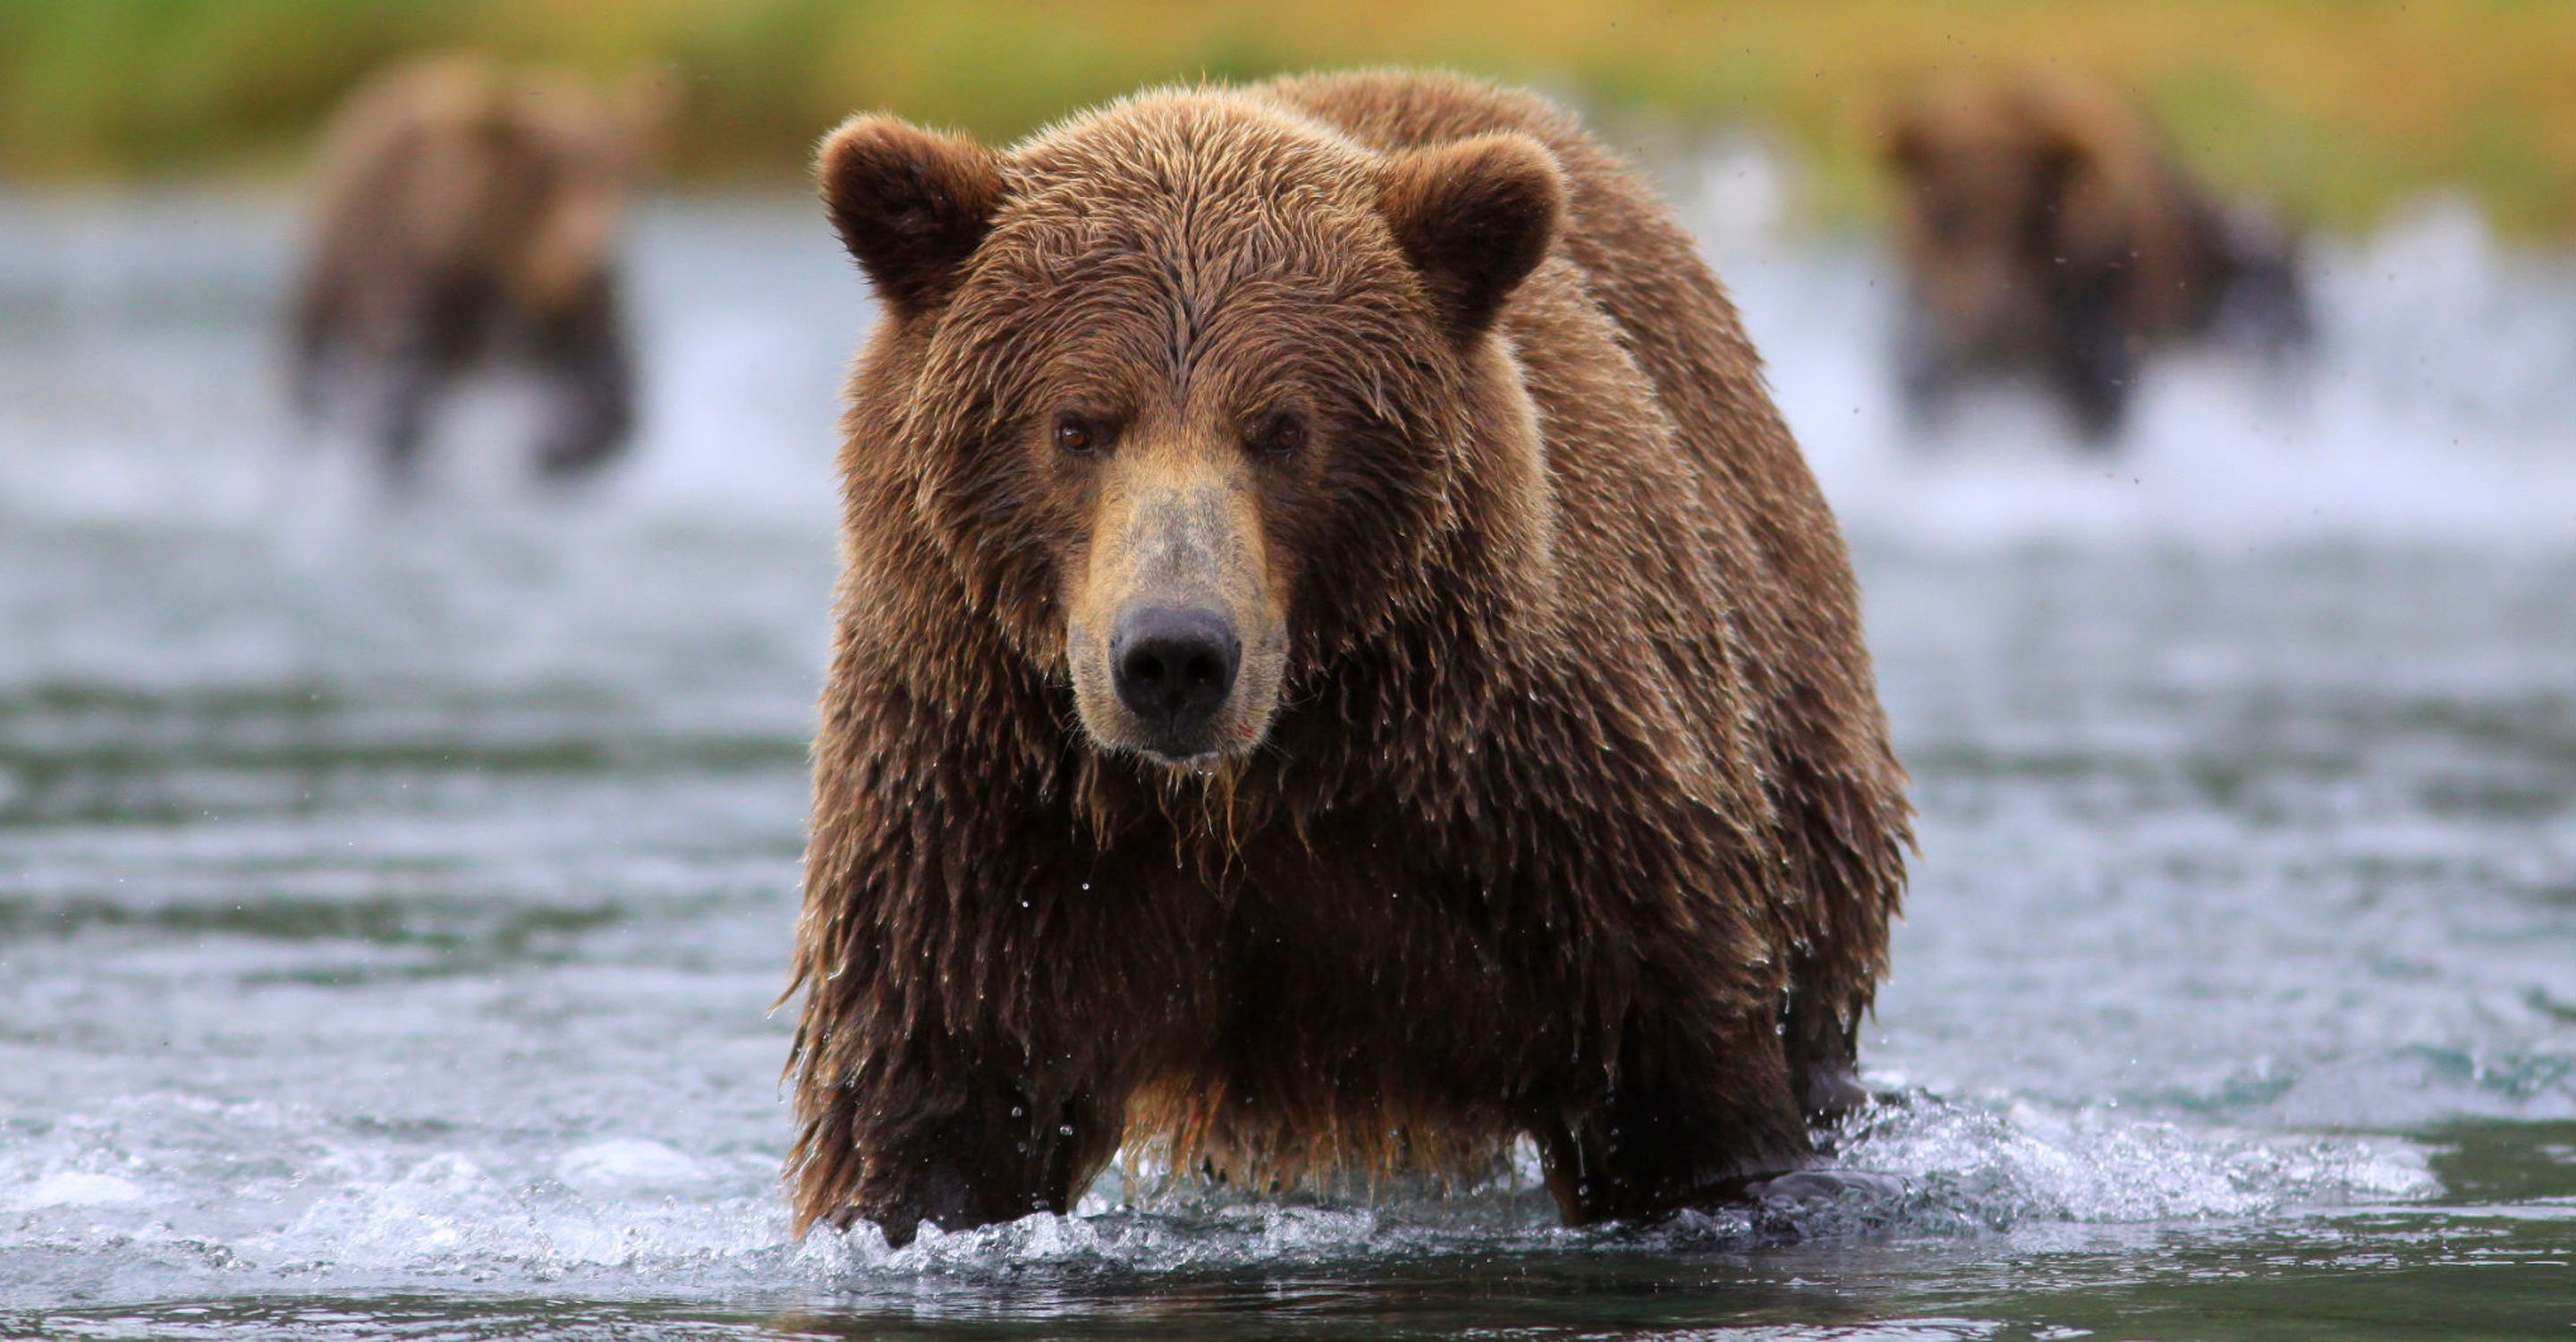 A brown bear looks for salmon in the water in Katmai National Park, Alaska, USA